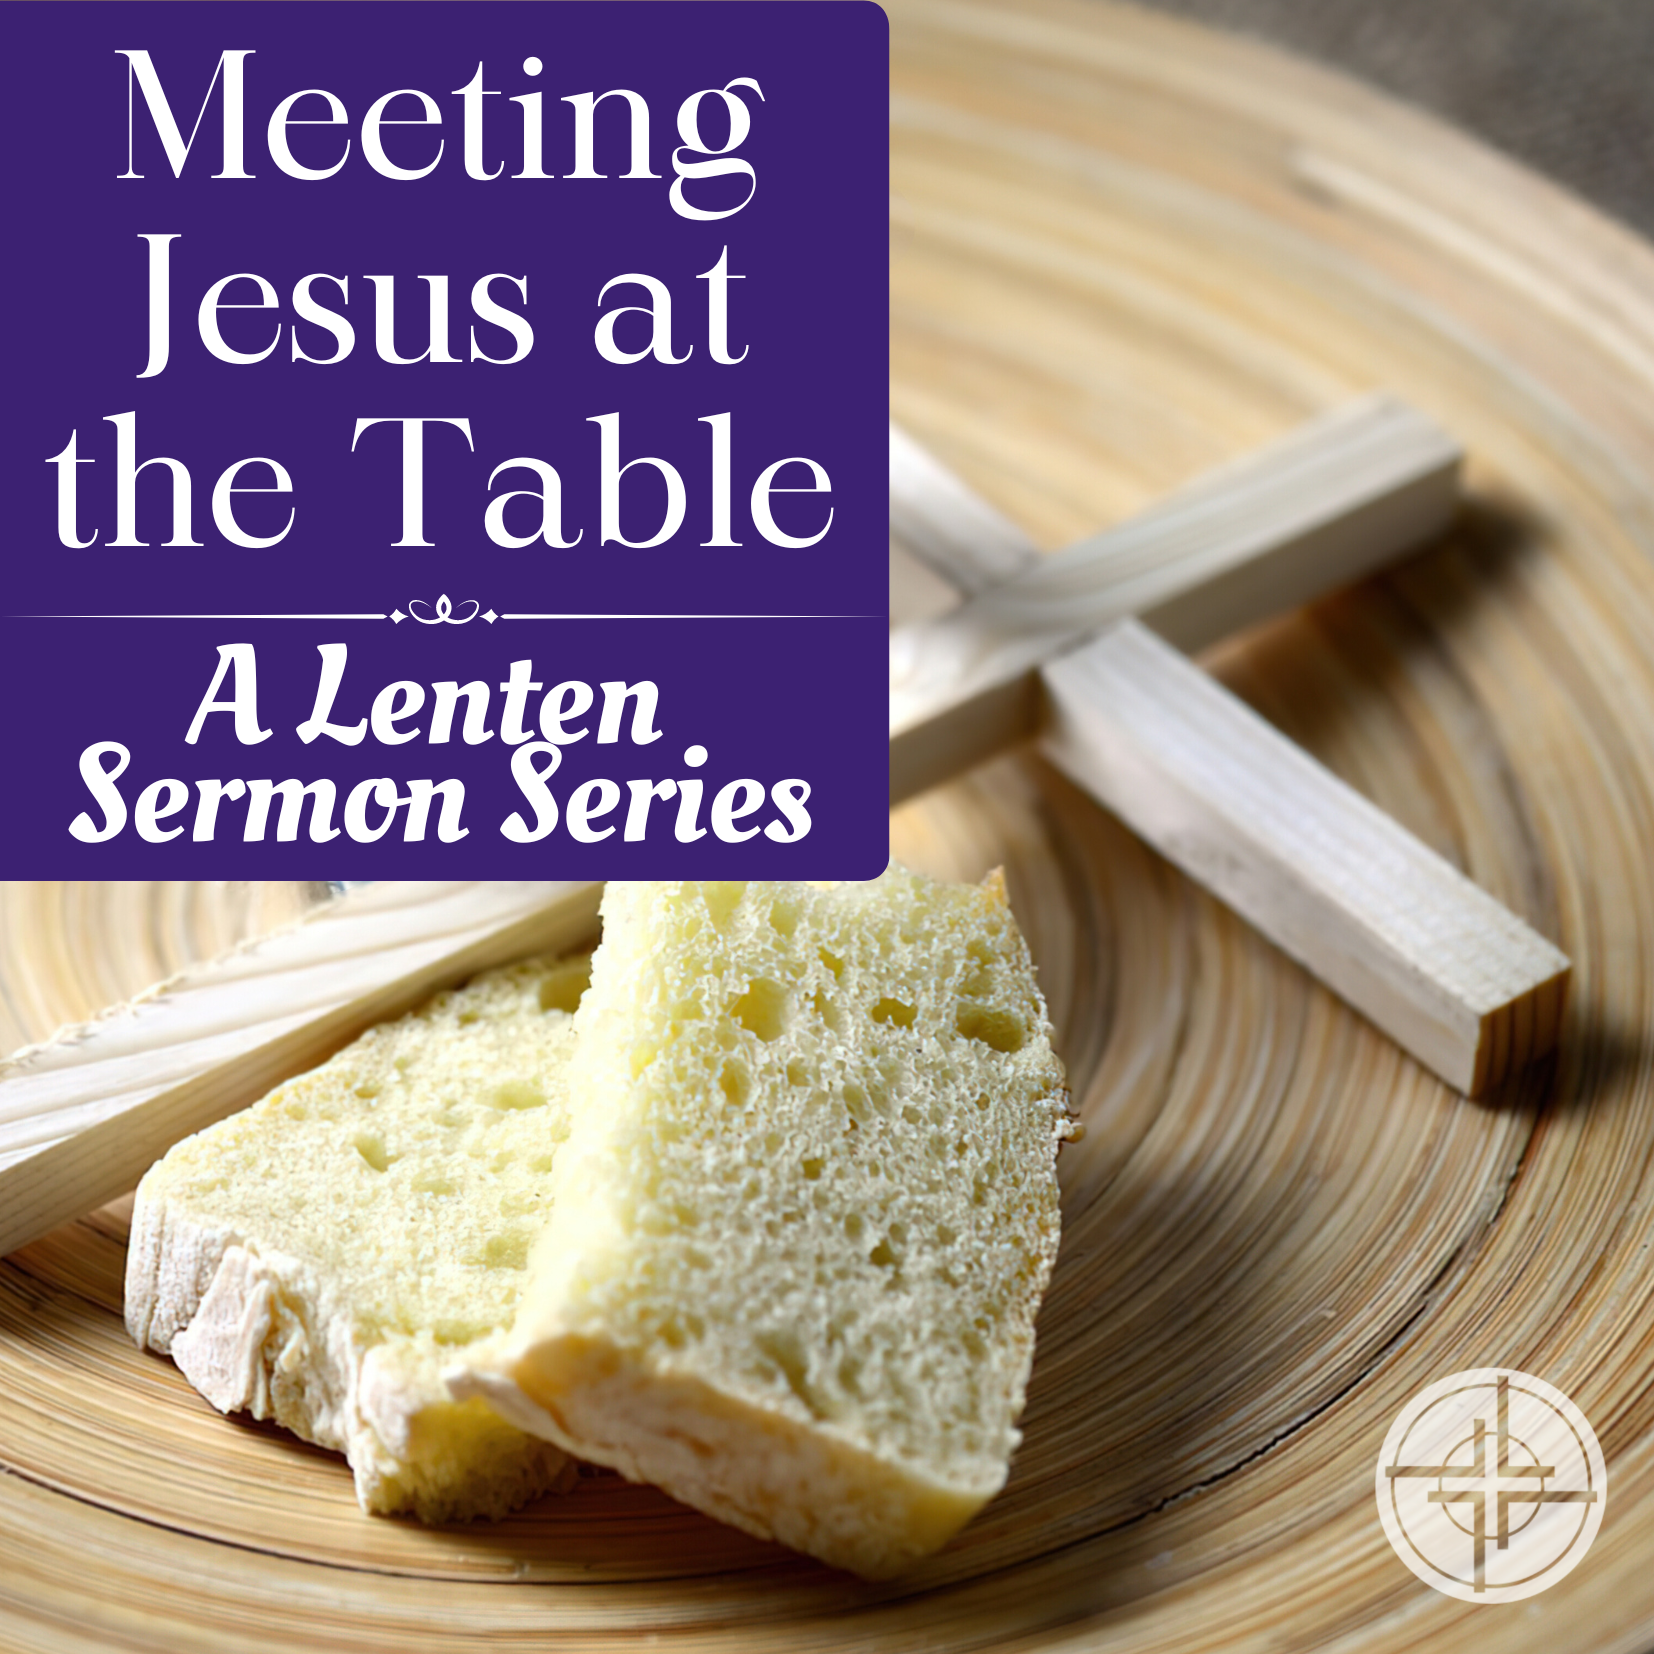 Meeting Jesus at the Table: A Lenten Sermon Series.  Image shows a table, a cross and some bread,